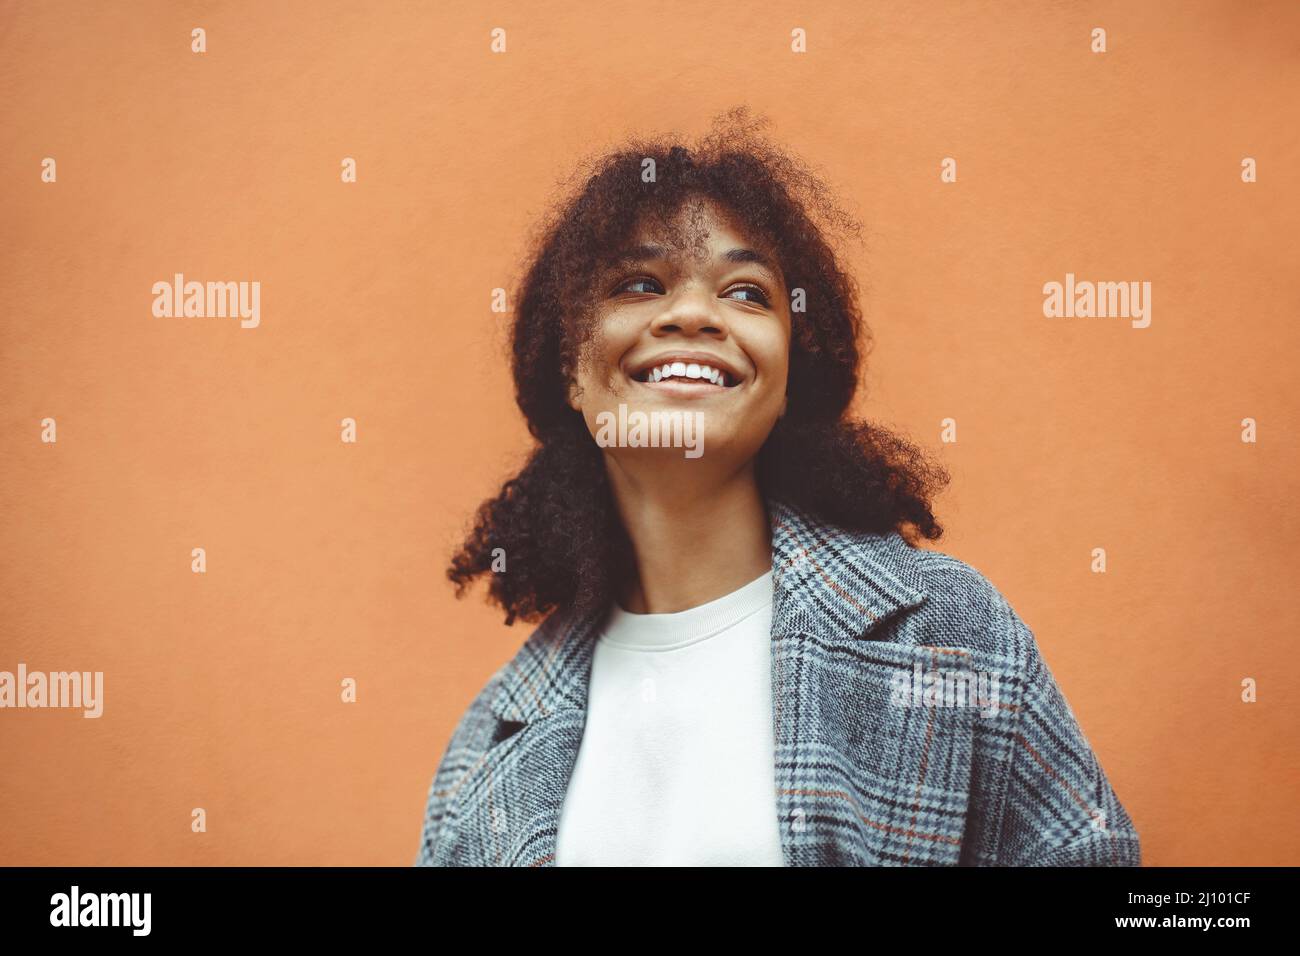 Happy African ethnicity girl with dark curly hairstyle in stylish coat looking aside and smiling Stock Photo